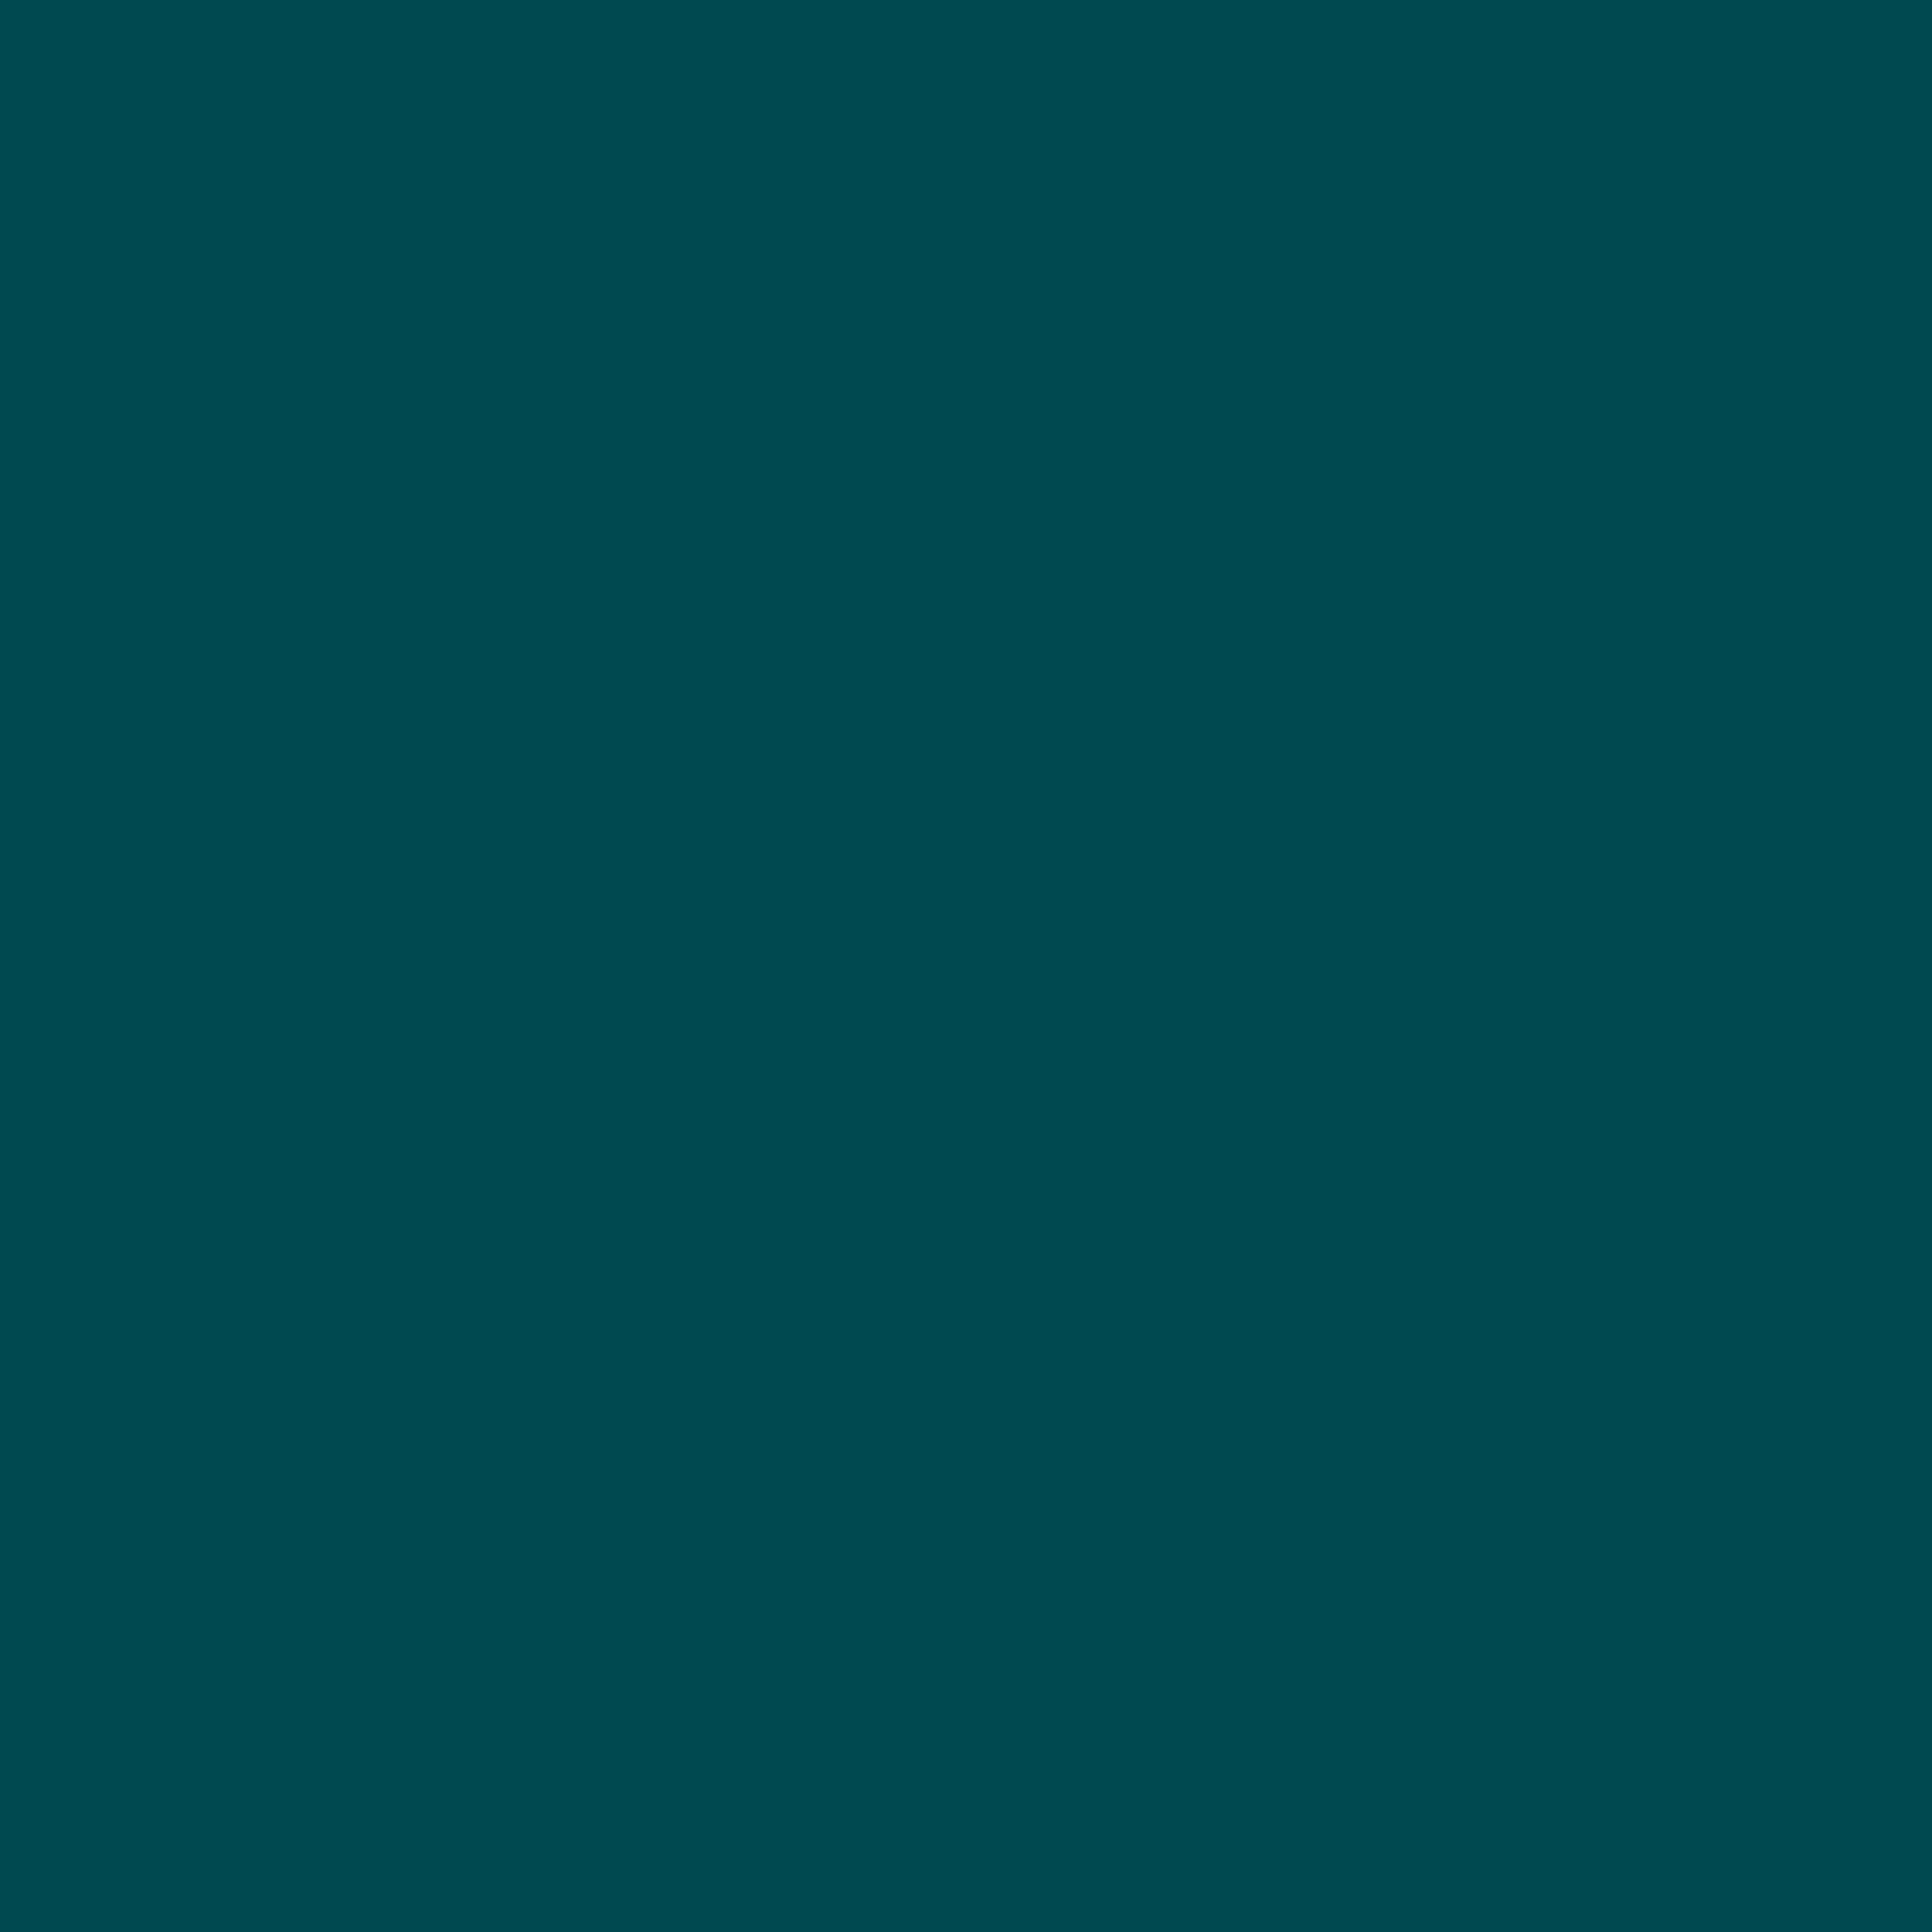 3600x3600 Midnight Green Solid Color Background